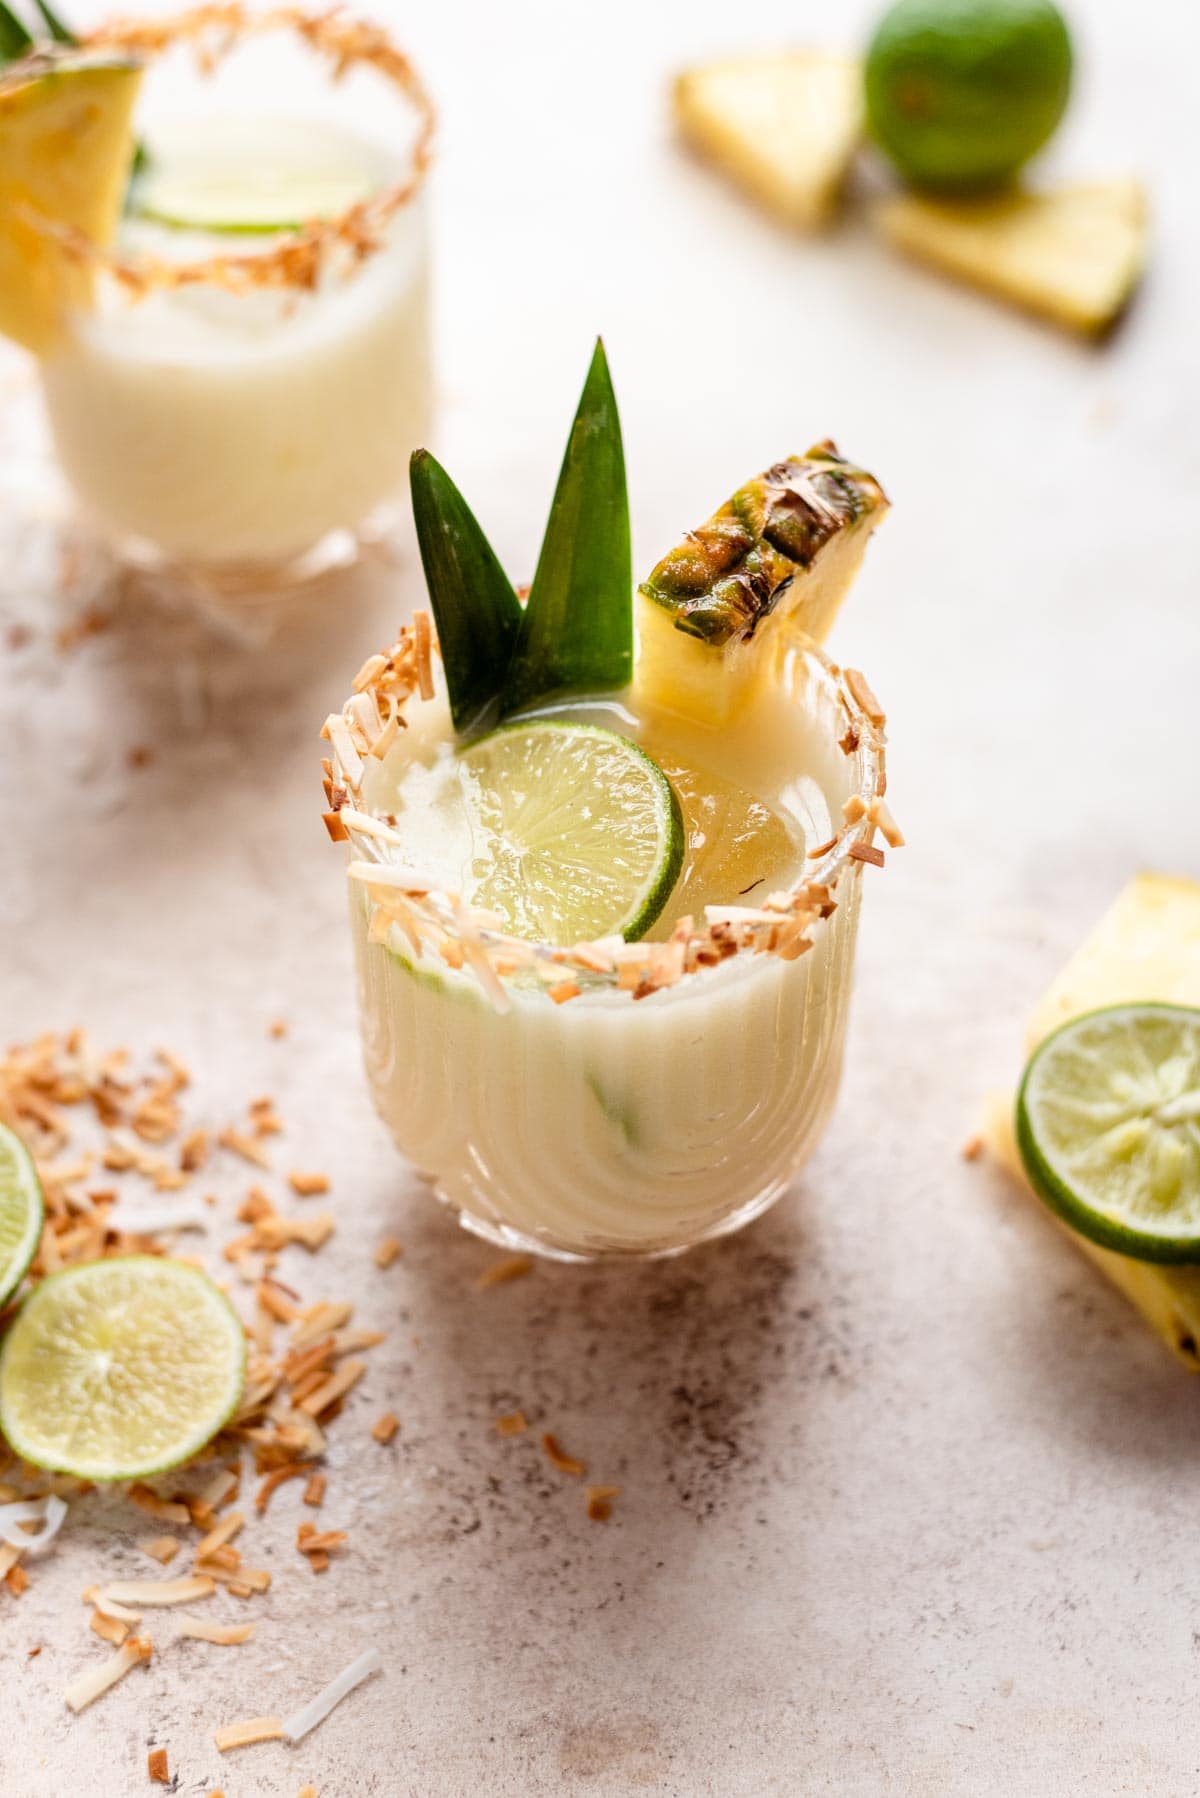 Pineapple coconut margarita garnished with pineapple, lime, and pineapple leafs on a brown table with shaved coconut.